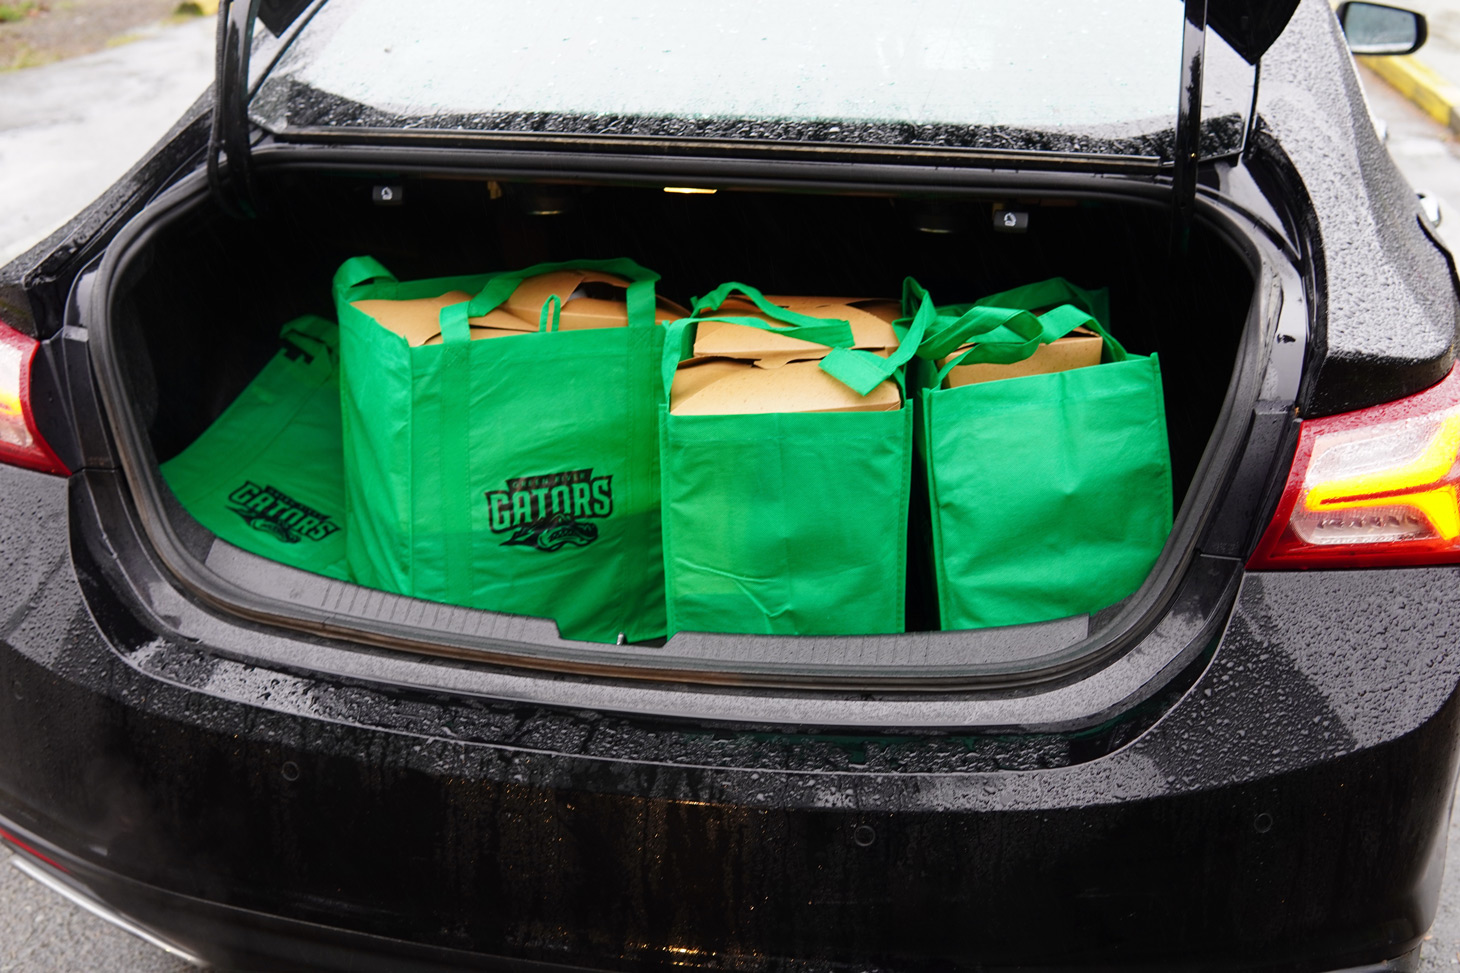 A DoorDash driver's trunk is full of completed meals